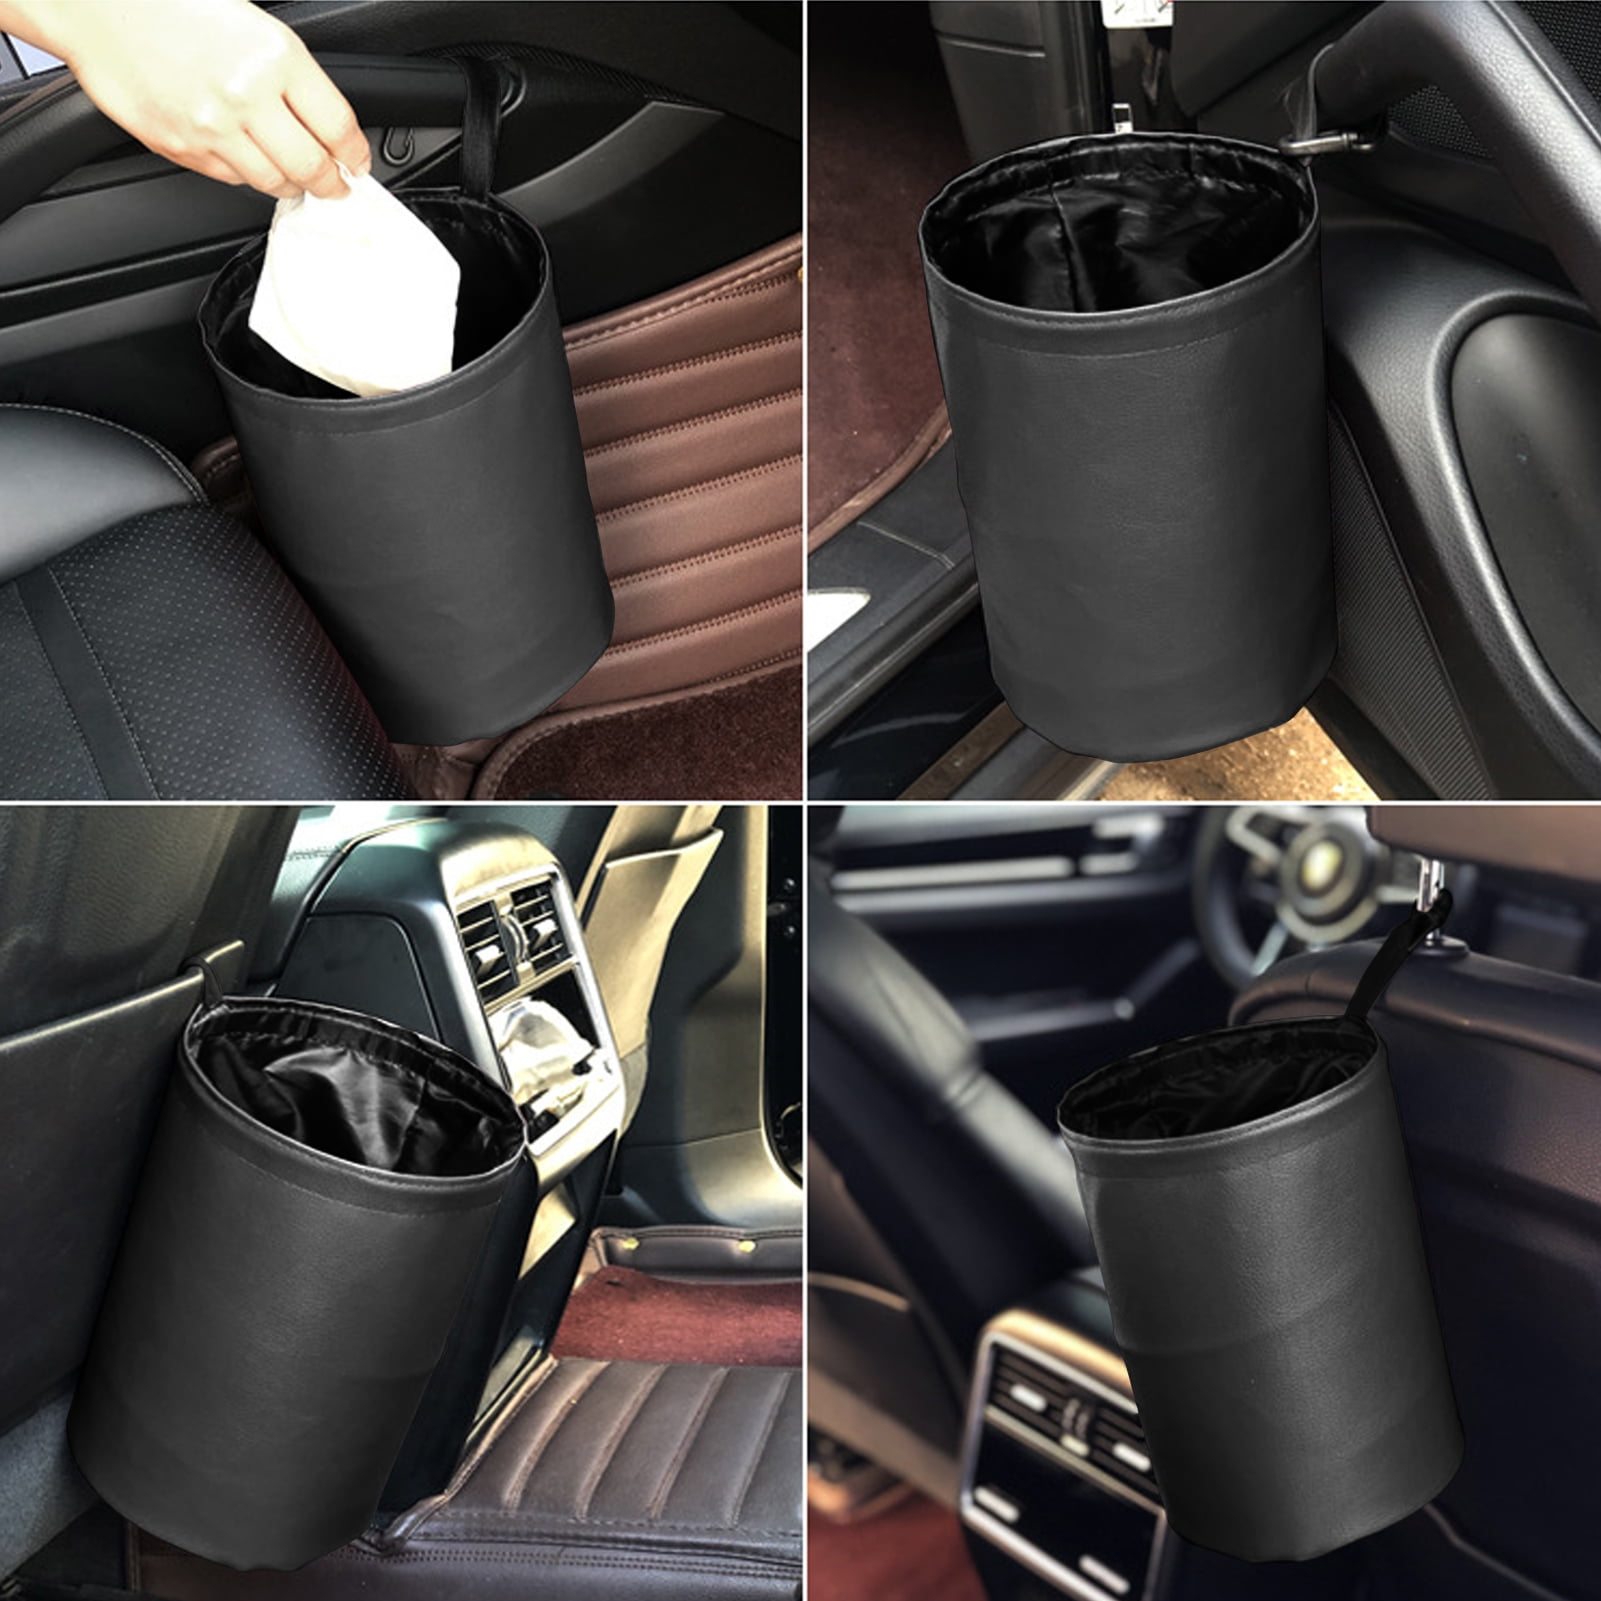 Homelove Car Trash Can, Collapsible Pop Up PU Leather Car